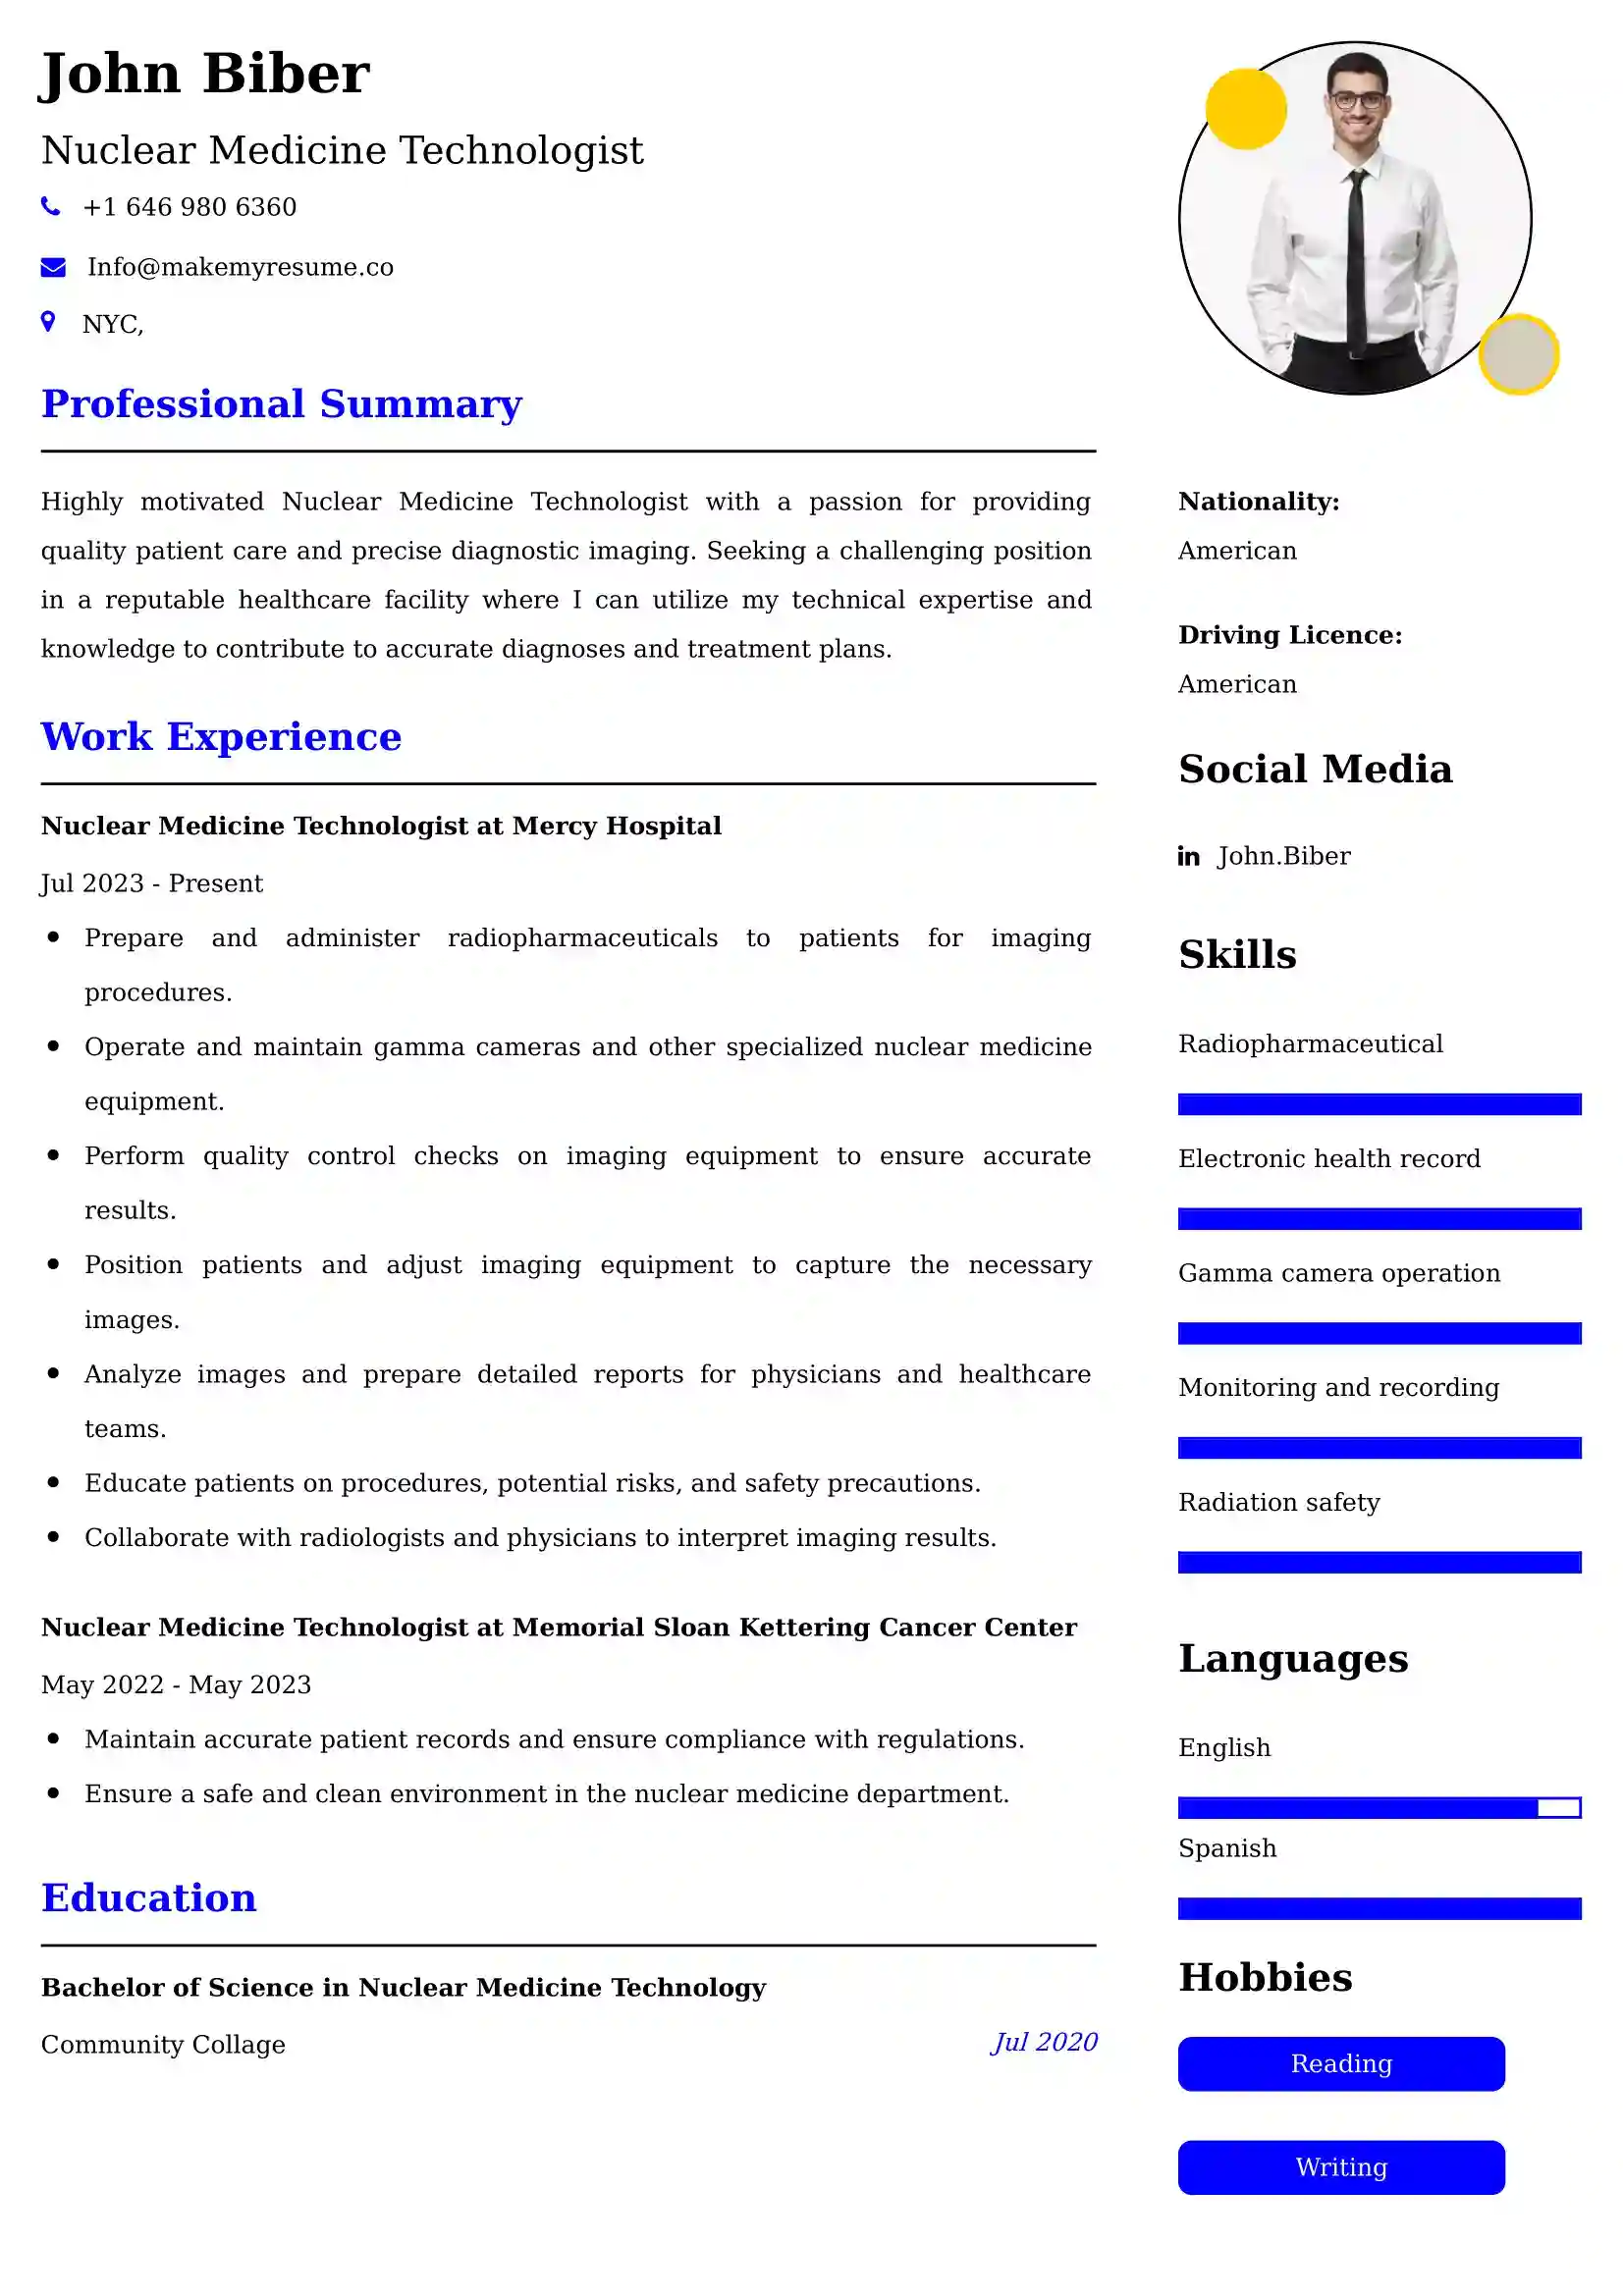 Nuclear Medicine Technologist Resume Examples - Australian Format and Tips